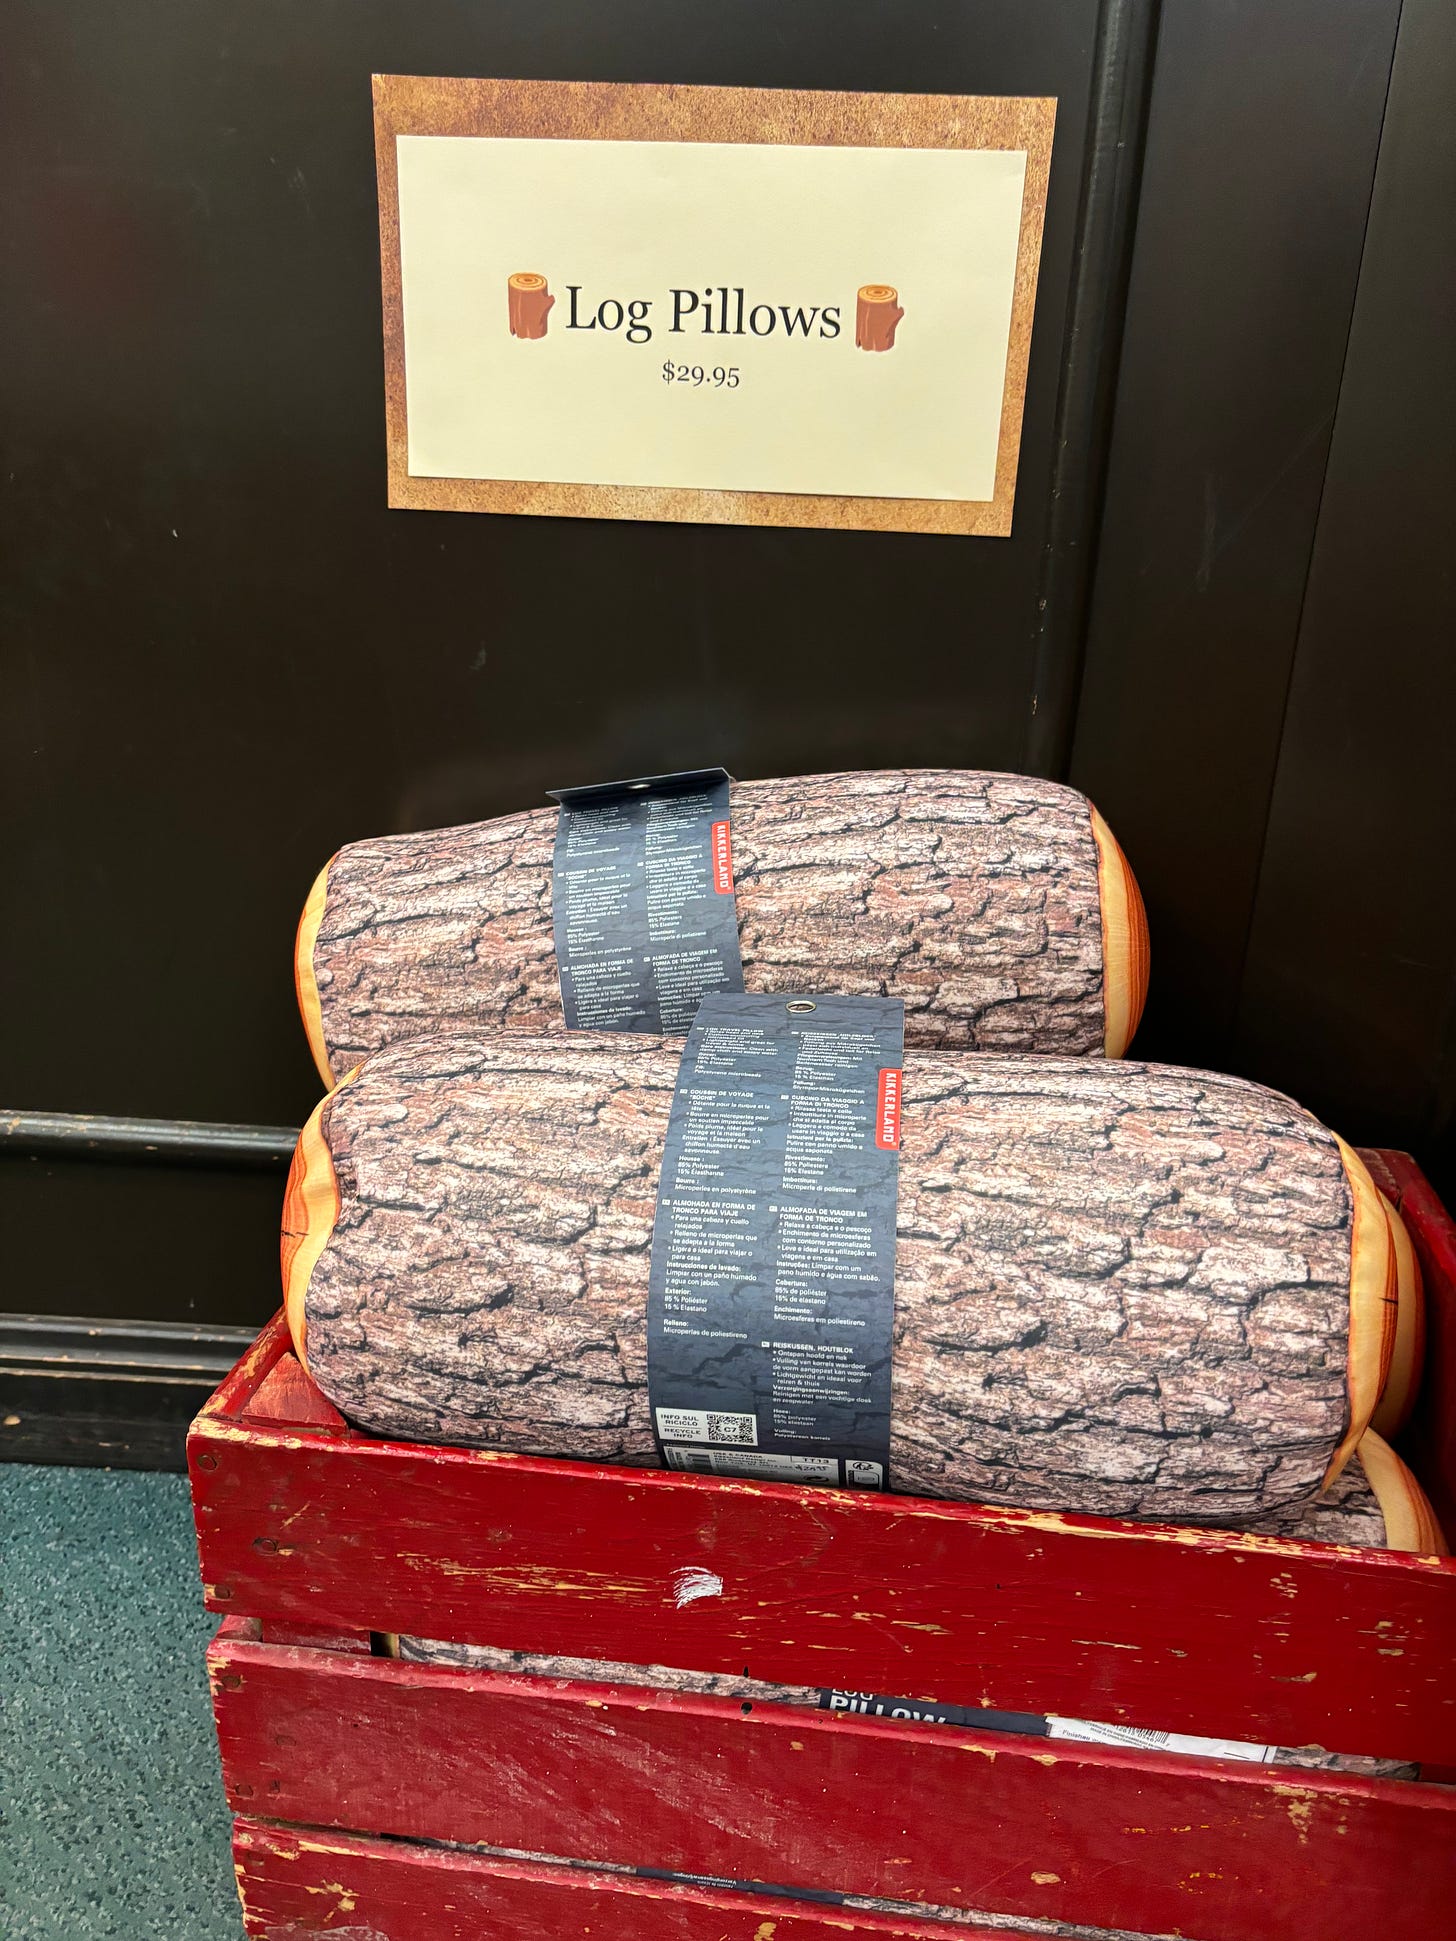 Two brown-bark-patterned pillows shaped like logs in a red wooden box.